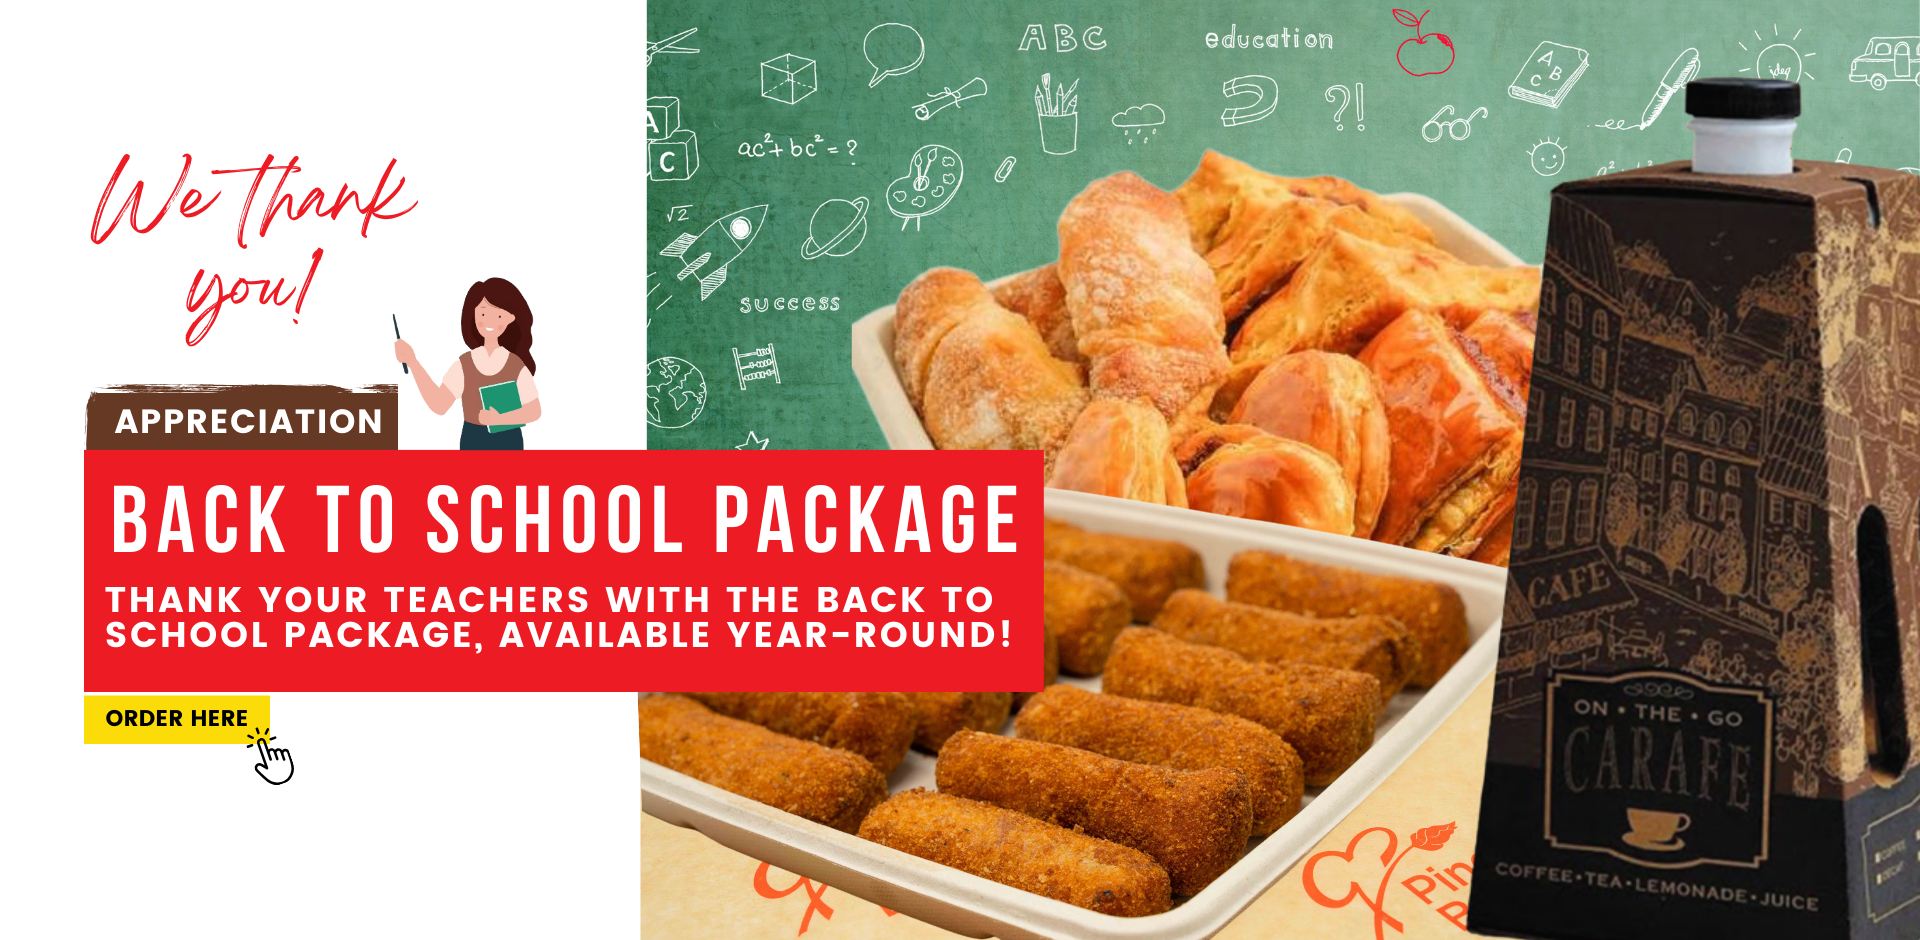 We thank you. appreciation. back to school package. Thank your teachers with the Back to School Package, available year-round! Order Here